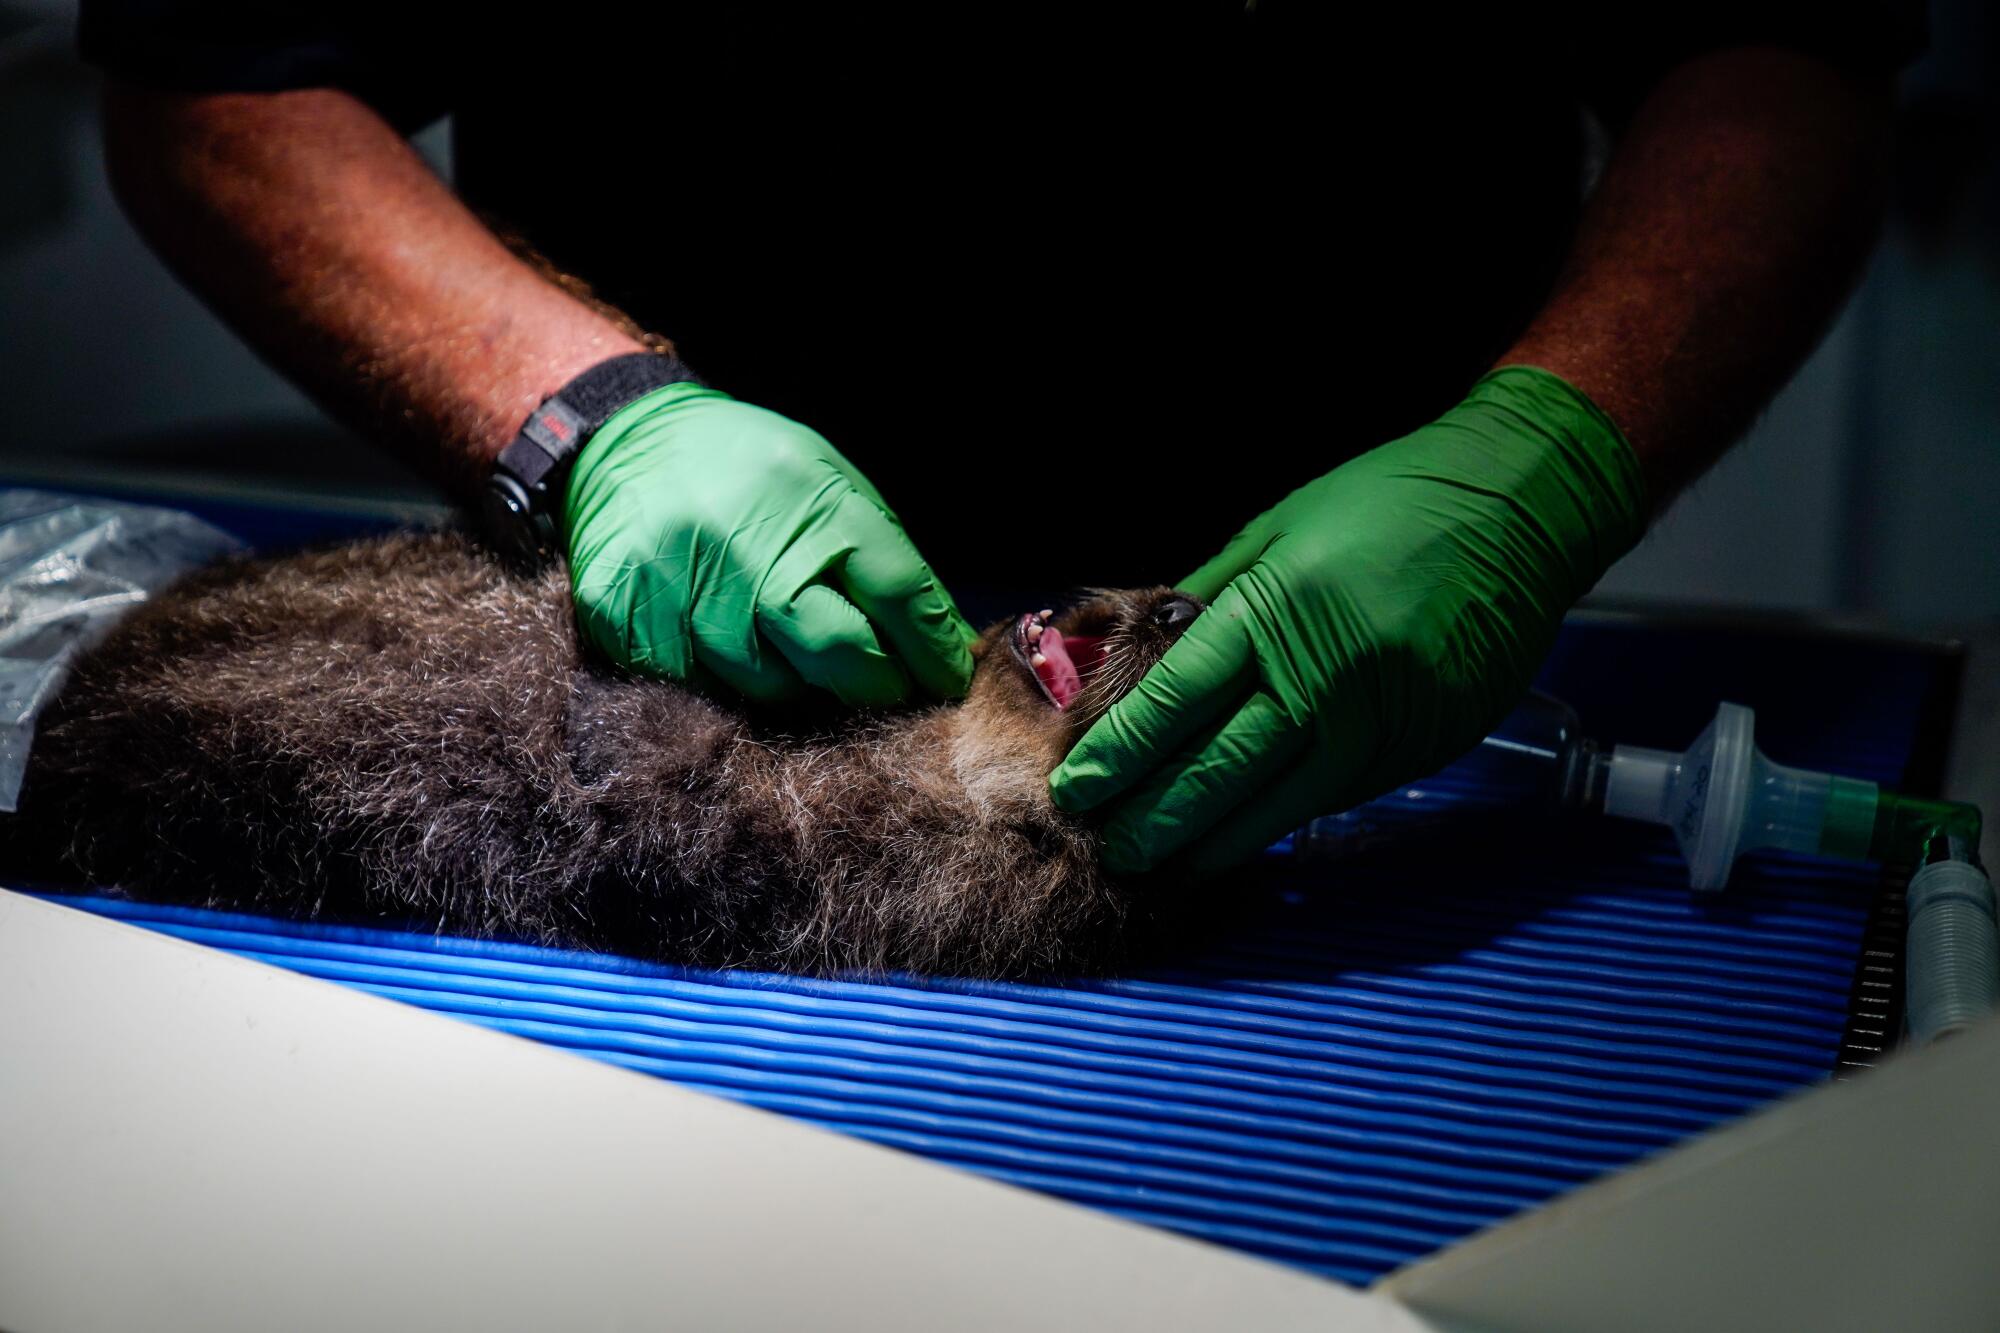 The green-gloved hands of a veterinarian open the mouth of a sea otter for examination